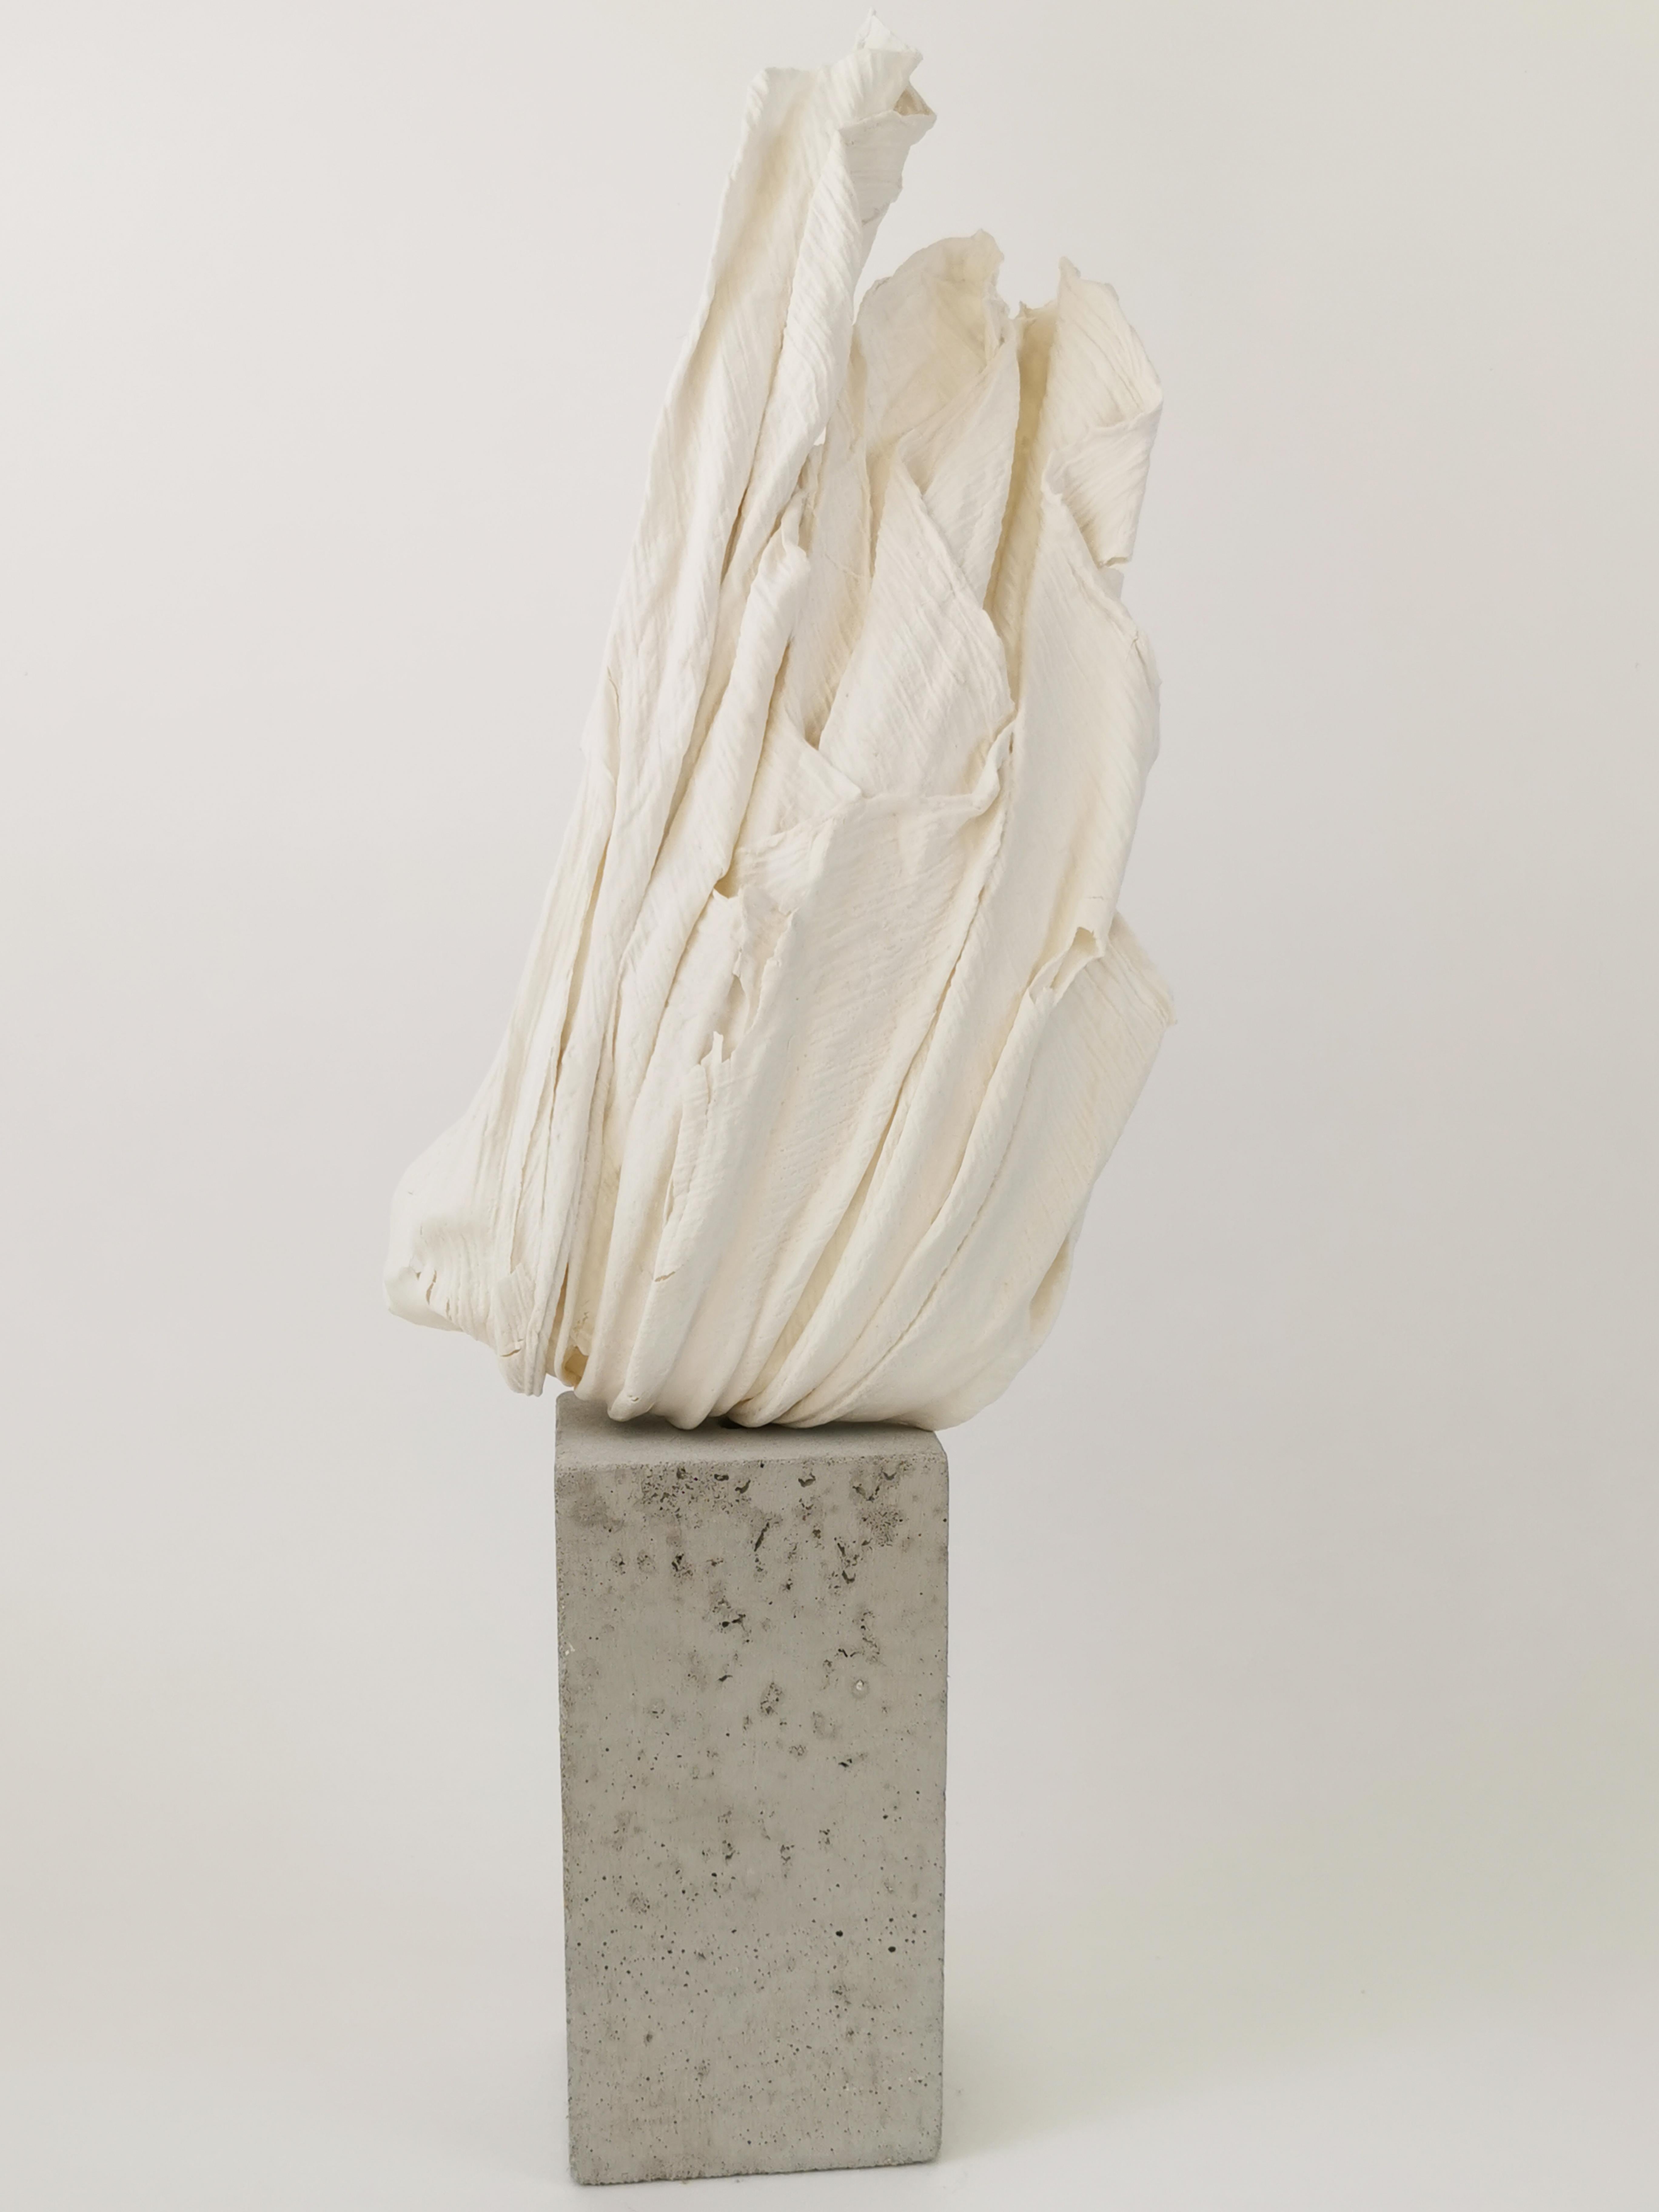 Fold II Sculpture by Dora Stanczel
One of a Kind.
Dimensions: D 18 x W 19 x H 59 cm.
Materials: Porcelain and beton pedestal.

I create bespoke and luxurious porcelain pieces with a careful aesthetic. Beyond the technical mastery of casting, what